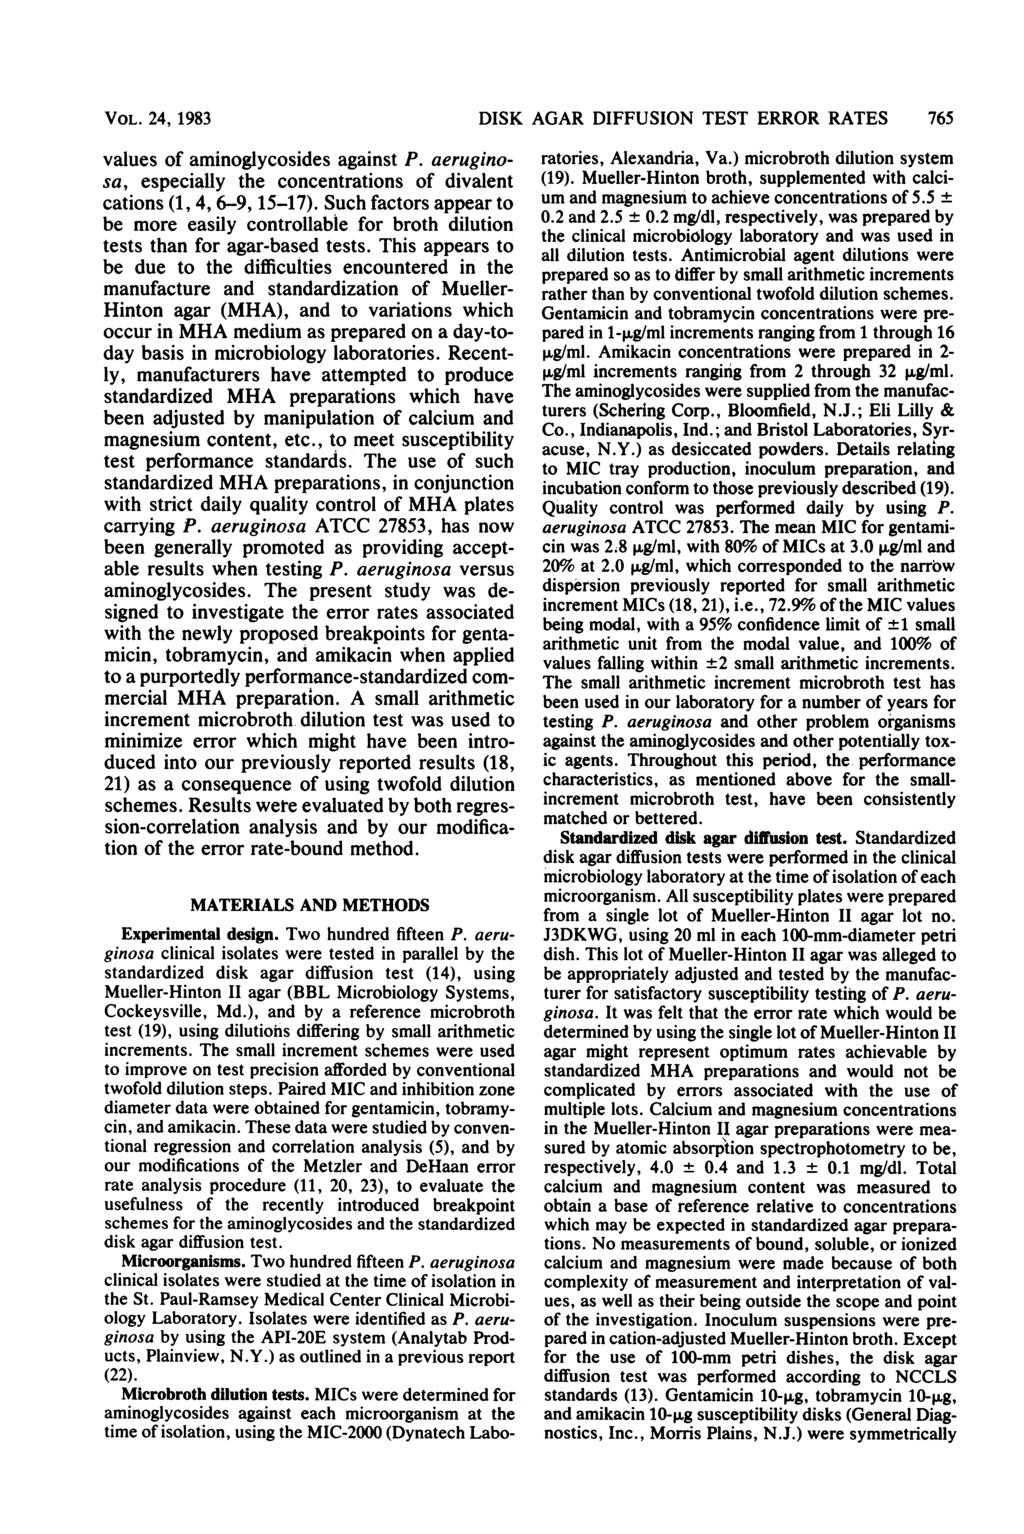 VOL. 24, 1983 values of aminoglycosides against P. aeruginosa, especially the concentrations of divalent cations (1, 4, 6-9, 15-17).